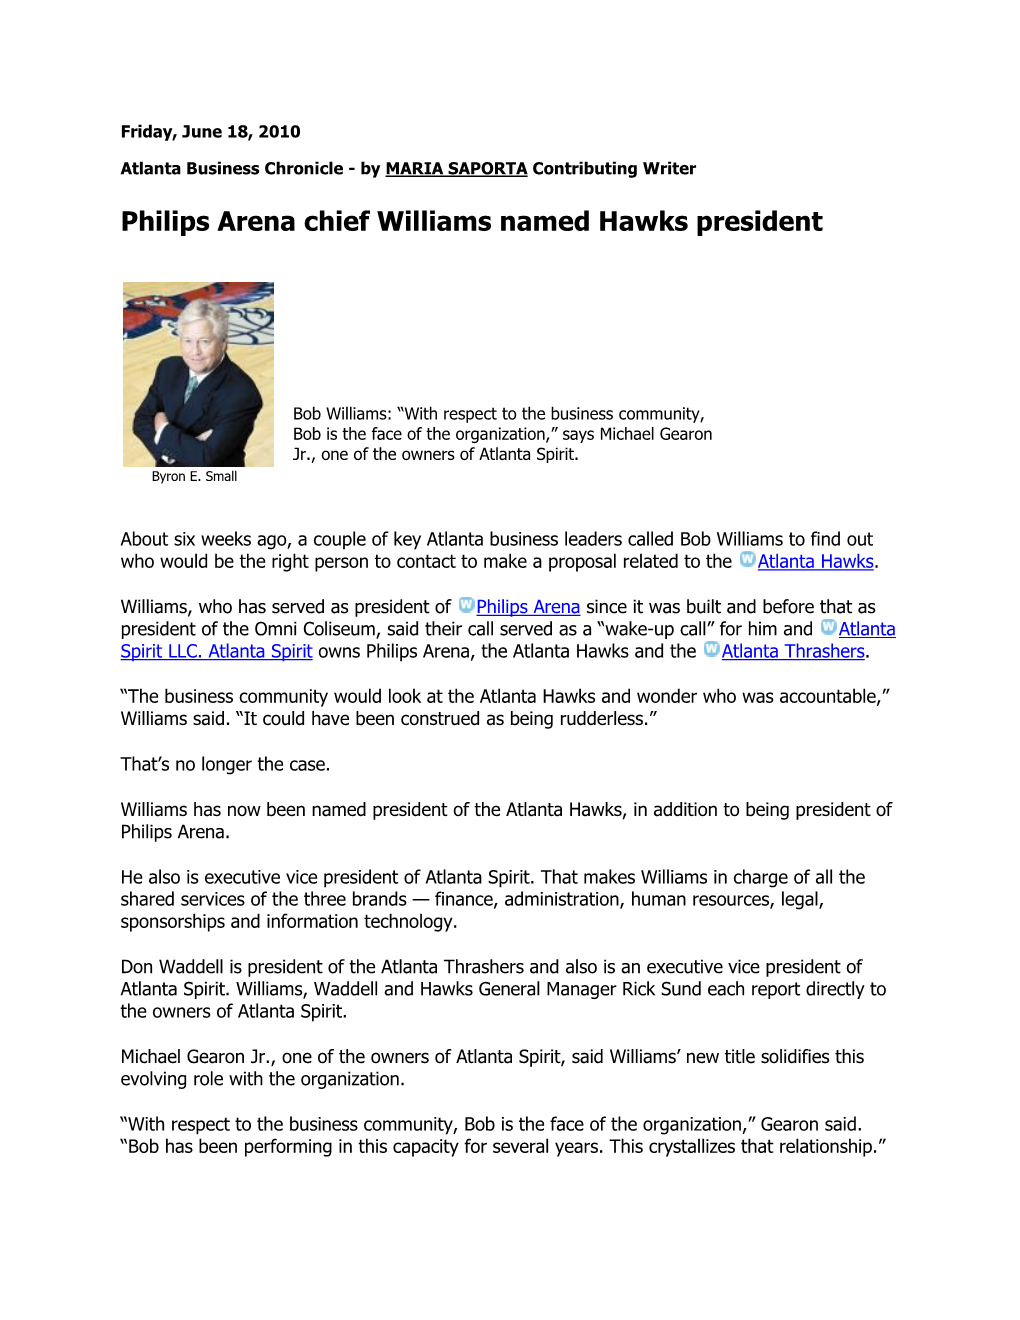 Philips Arena Chief Williams Named Hawks President